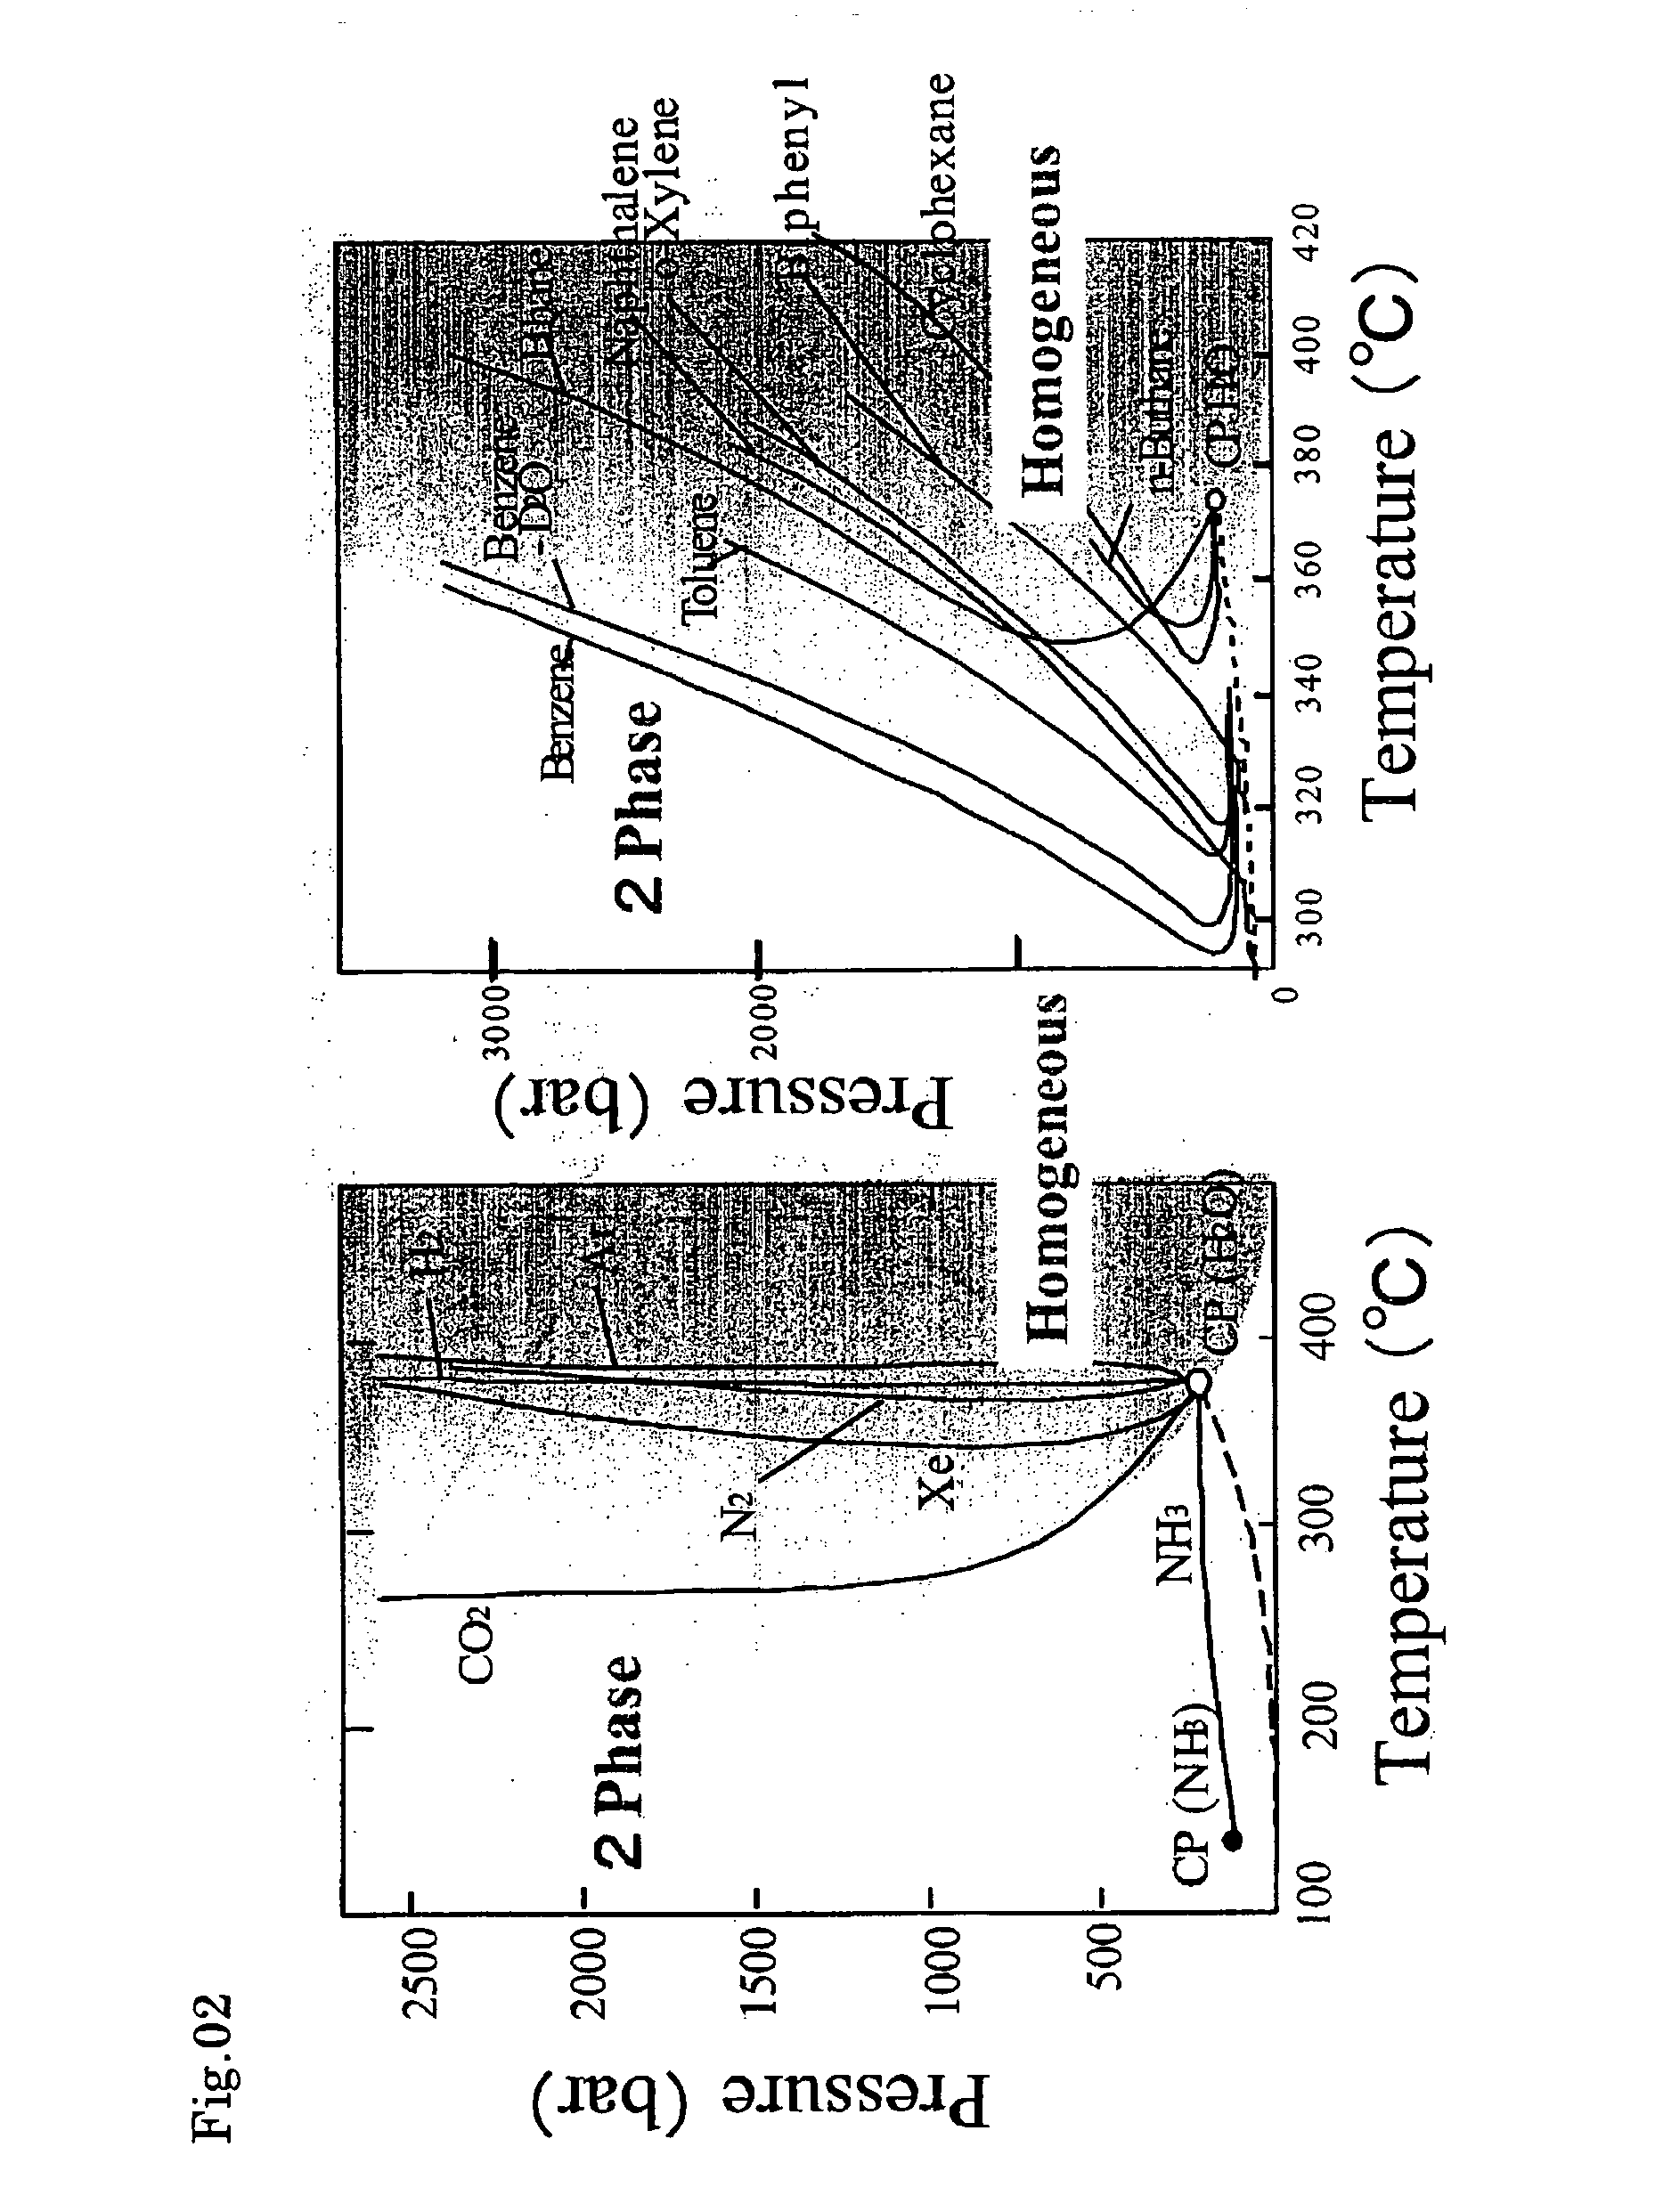 Organically modified fine particles